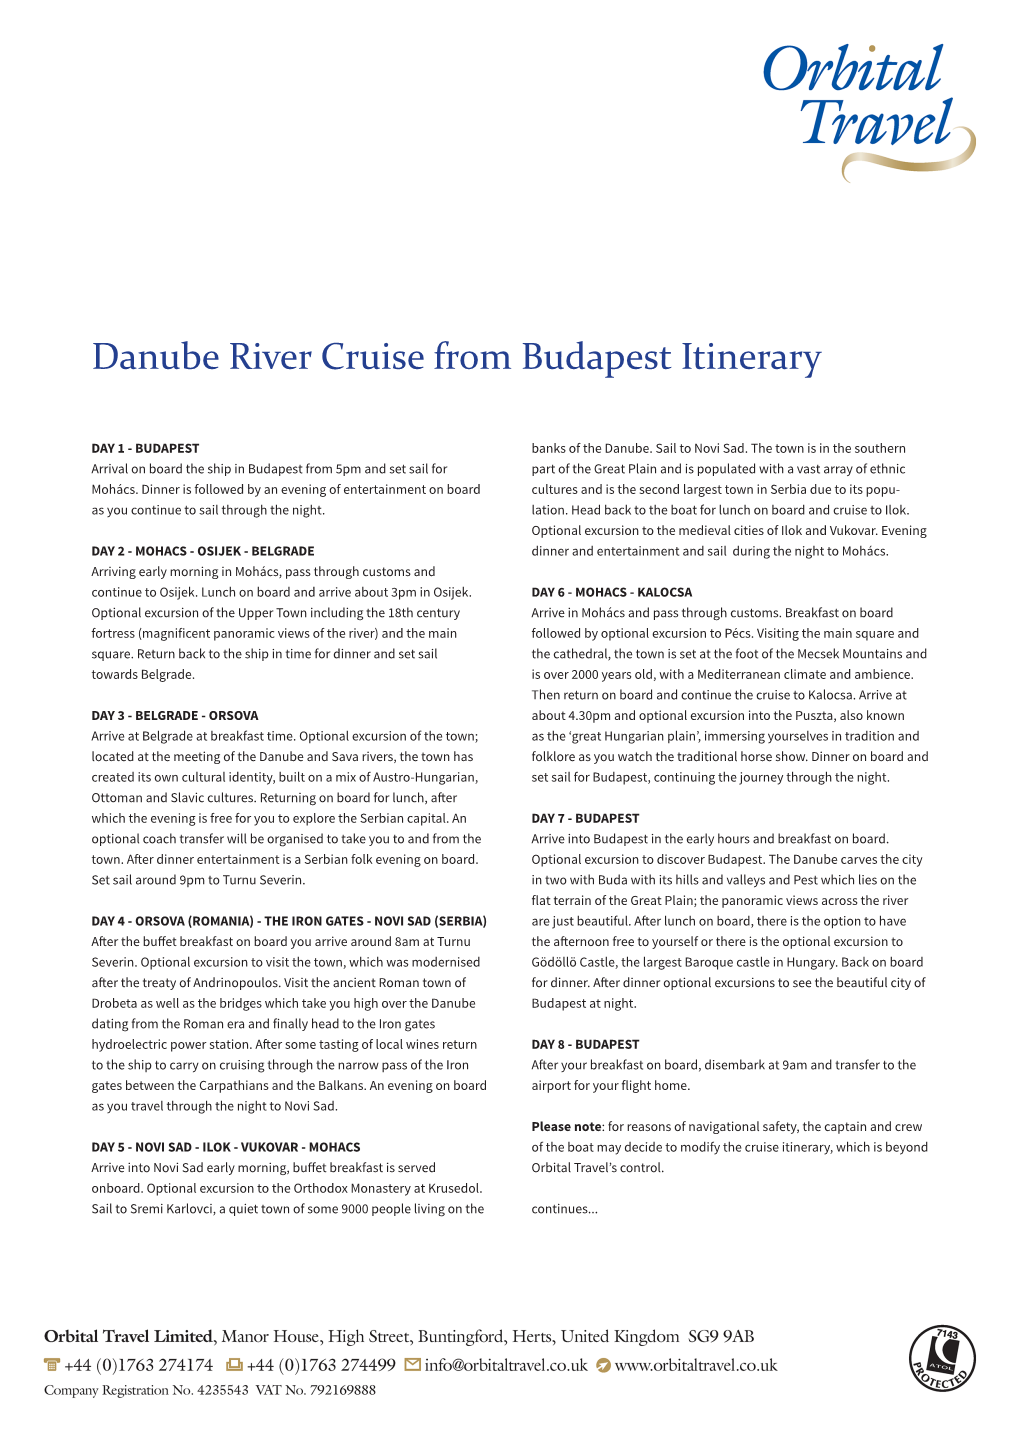 Danube River Cruise from Budapest Itinerary